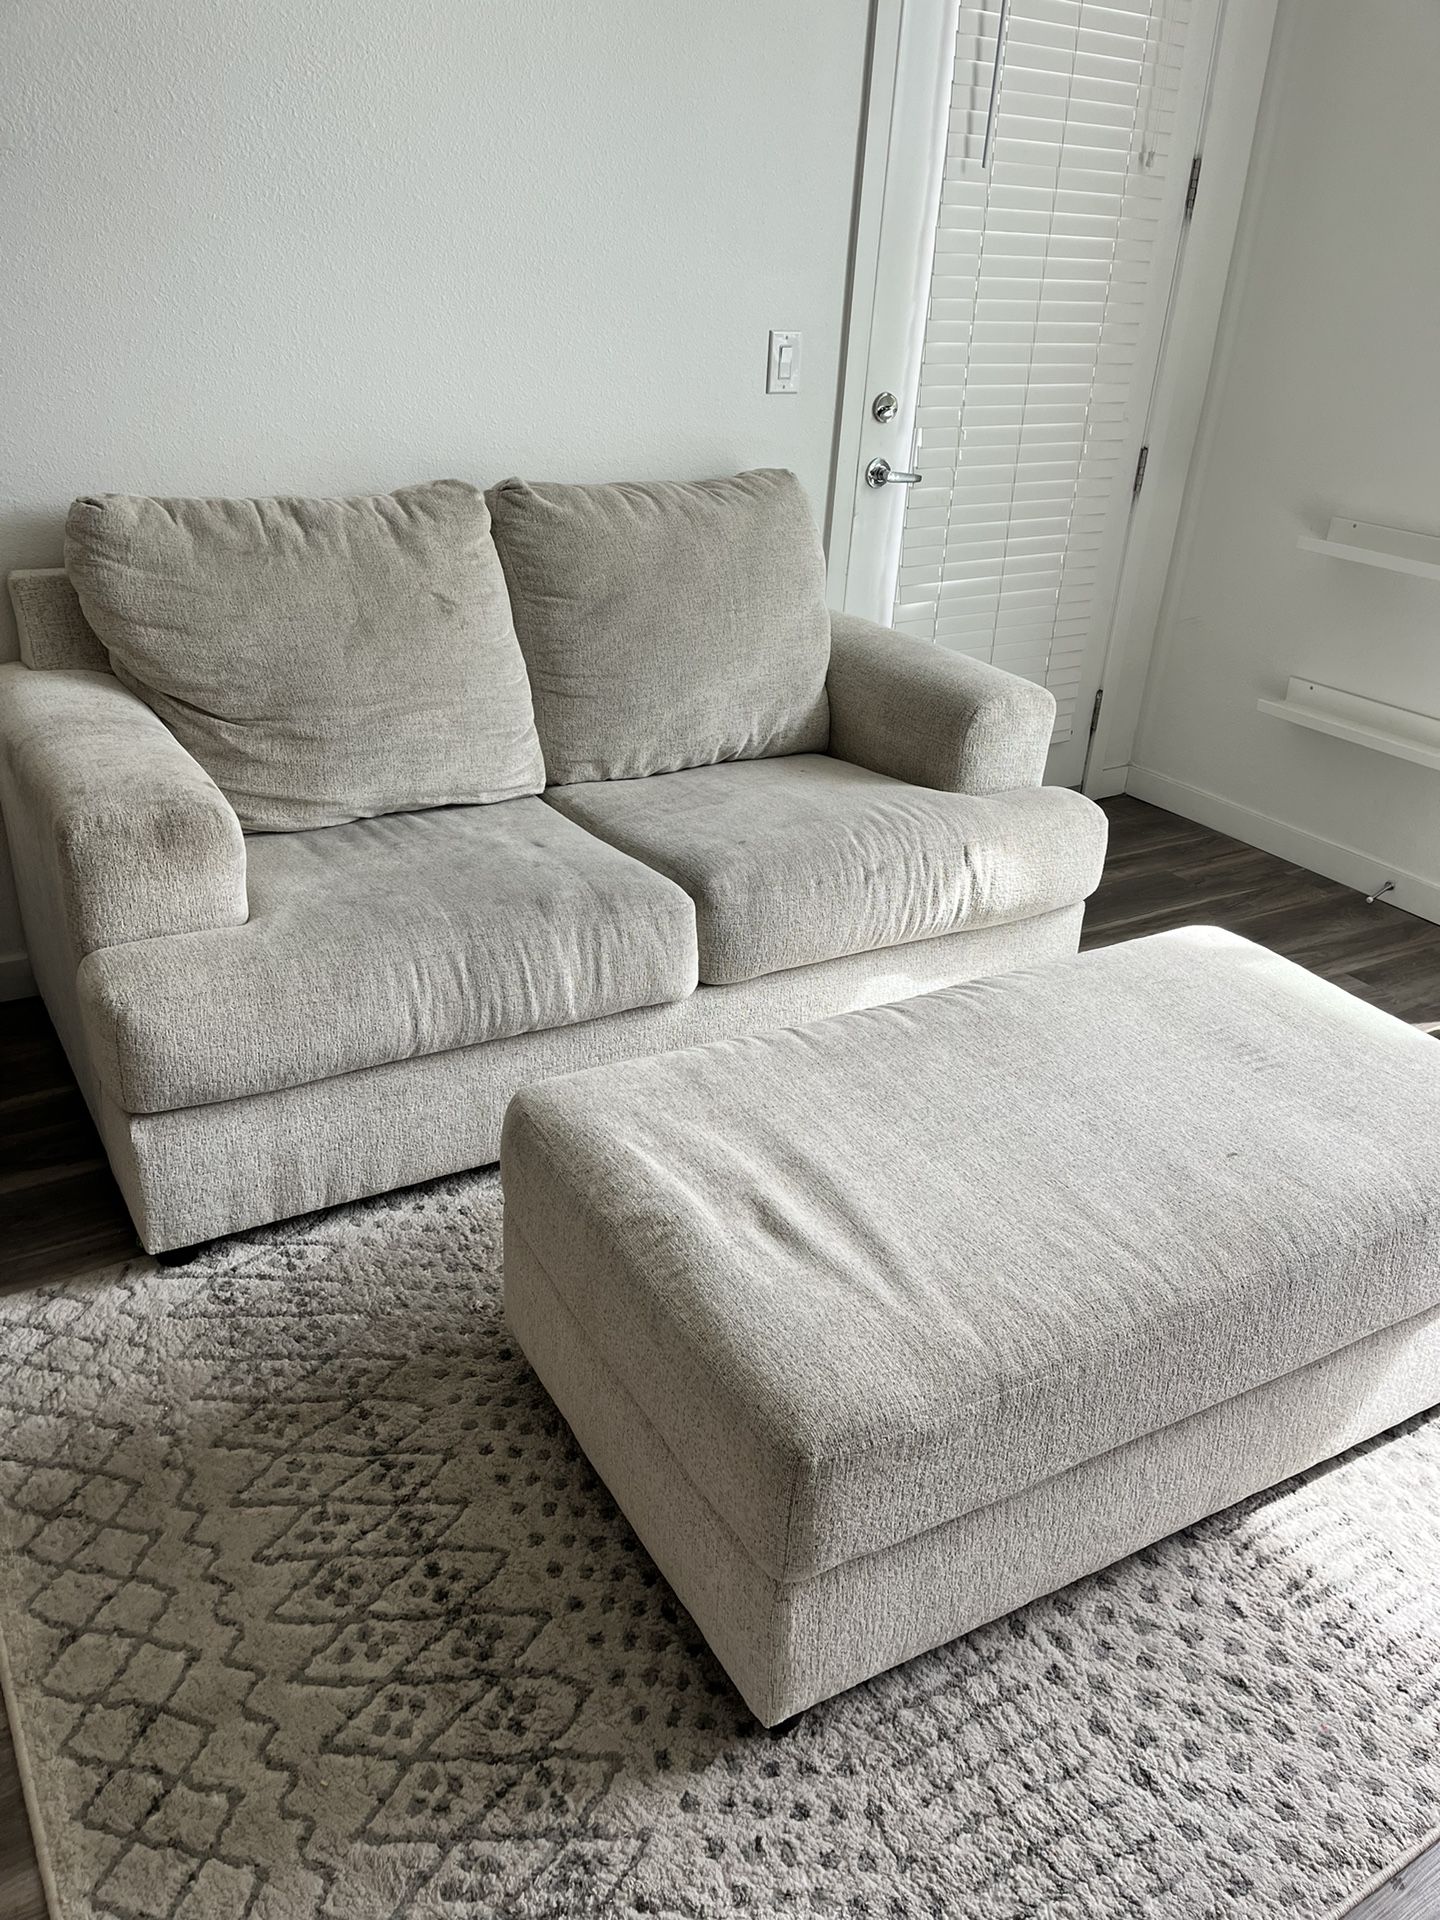 Loveseat, Ottoman And Matching Chair